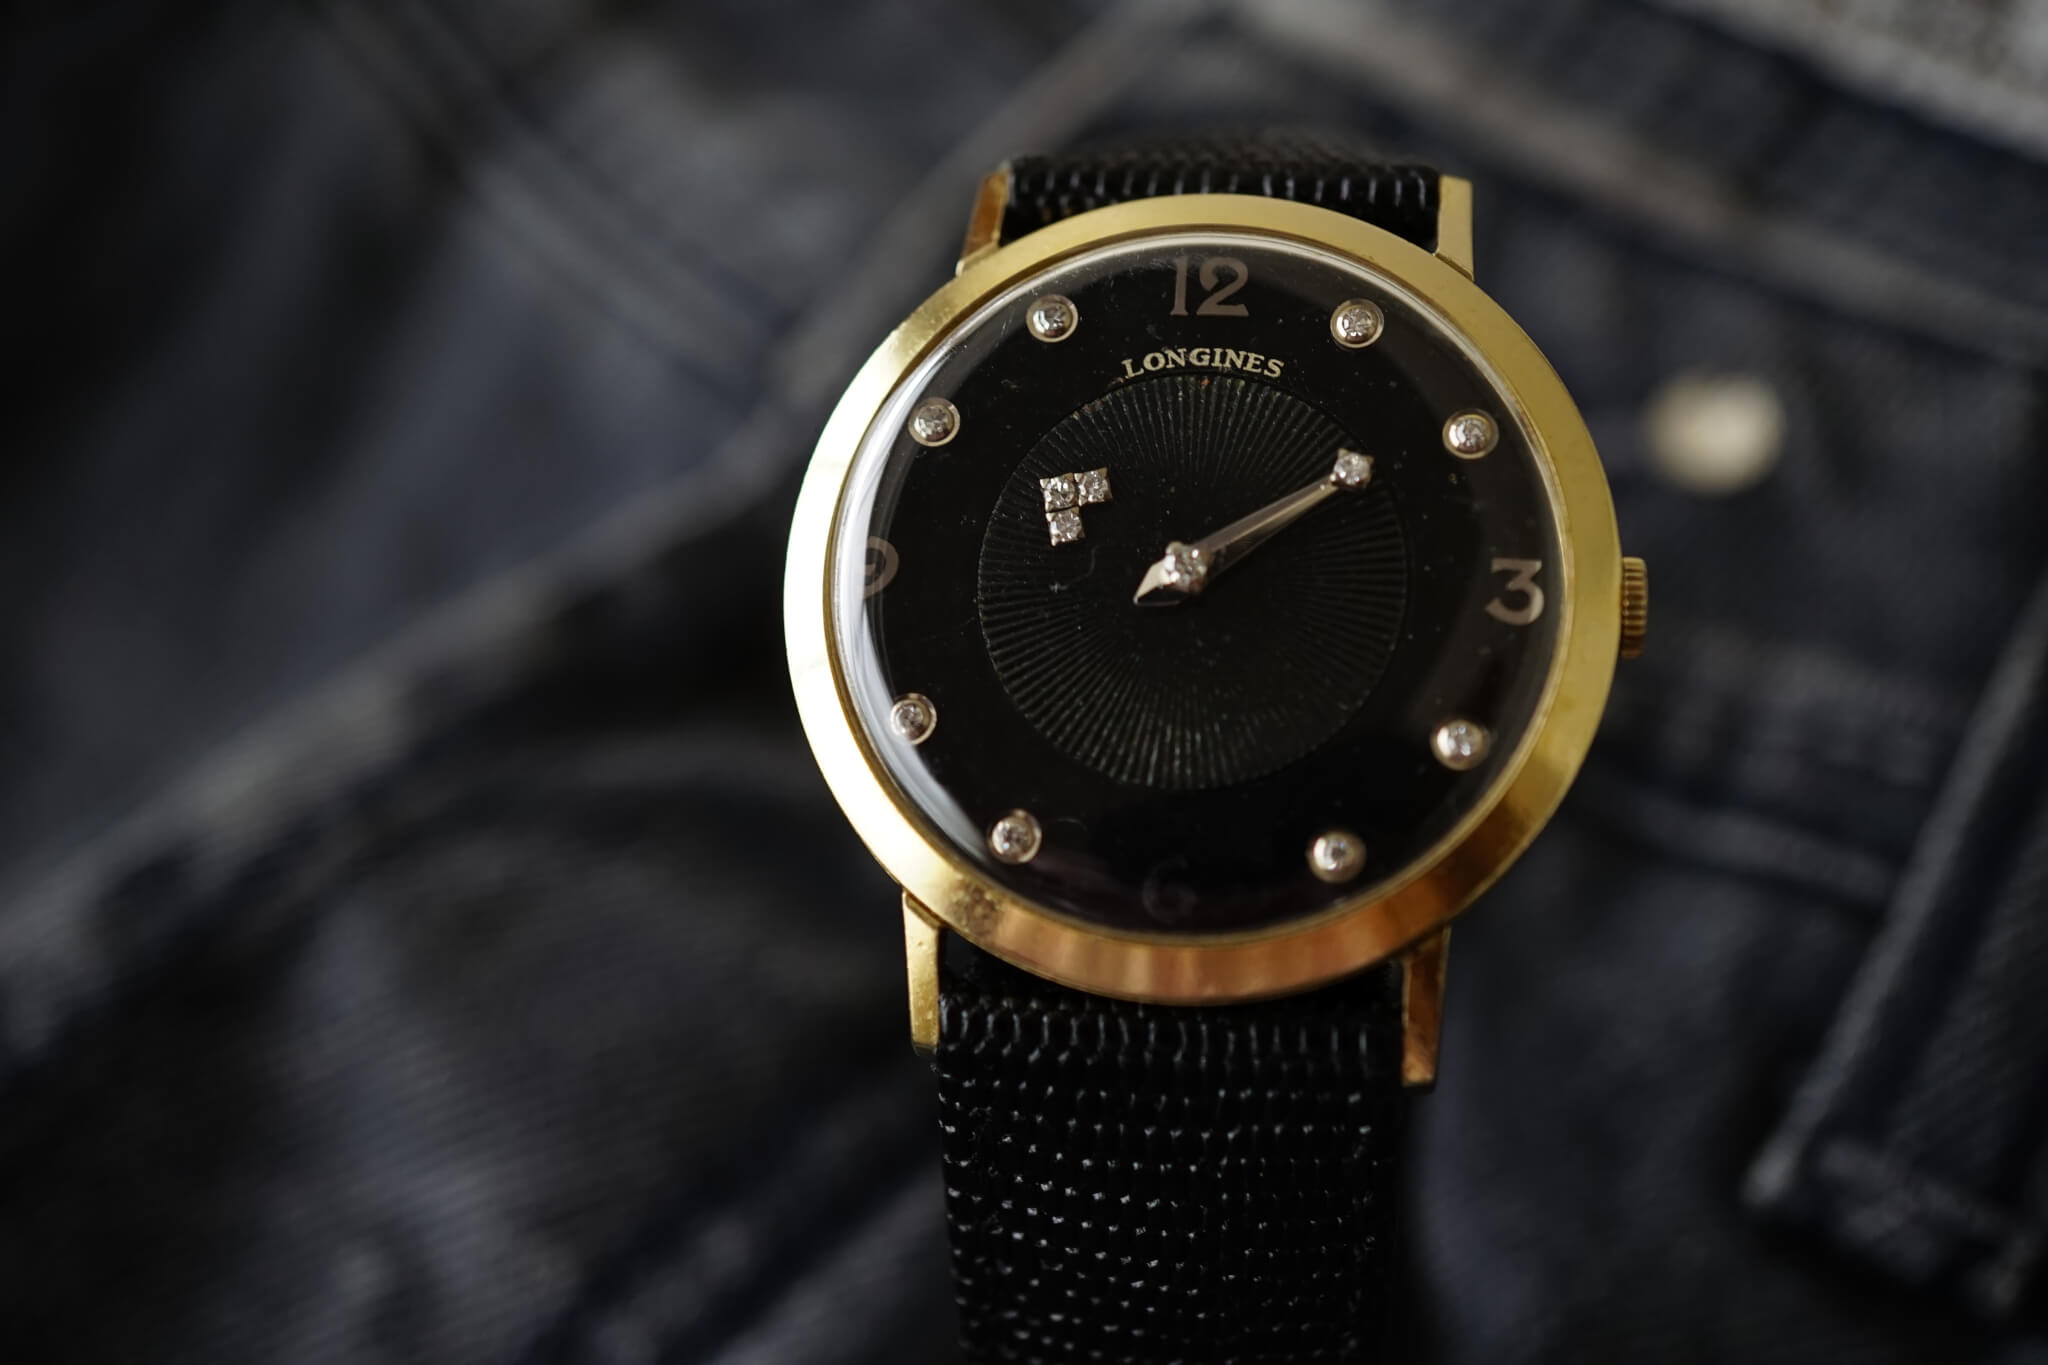 Vintage Longines Mystery watch with black dial